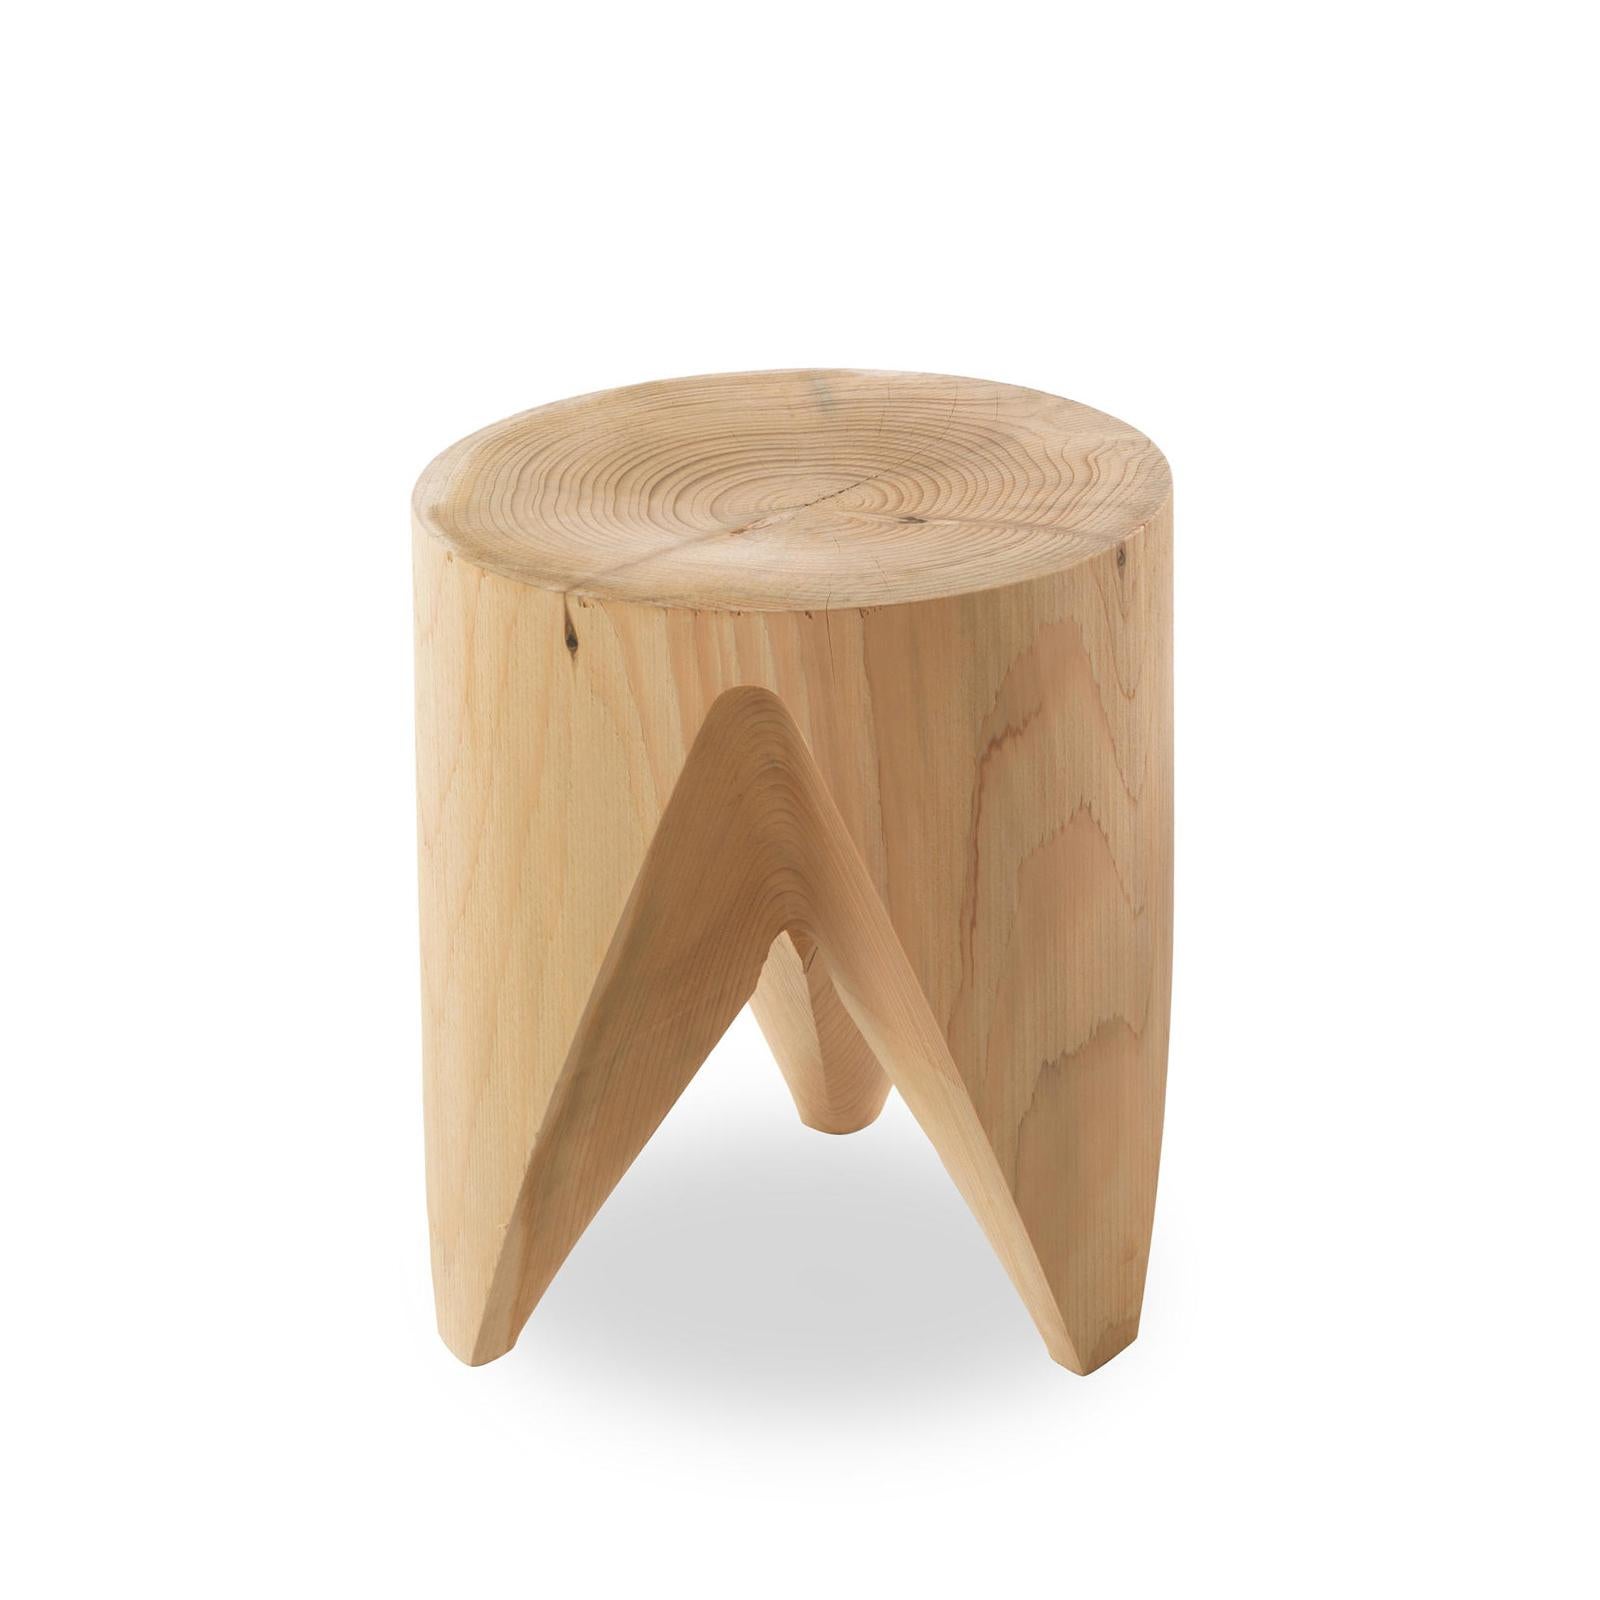 Stool step set of 2 in natural solid cedar wood,
treated with natural pine extract. These 2 stools
can fit one in the other.
Unit price: 1625,00€.
Set of 2: 3250,00€.
Solid cedar wood include movement, 
cracks and changes in wood conditions, 
this